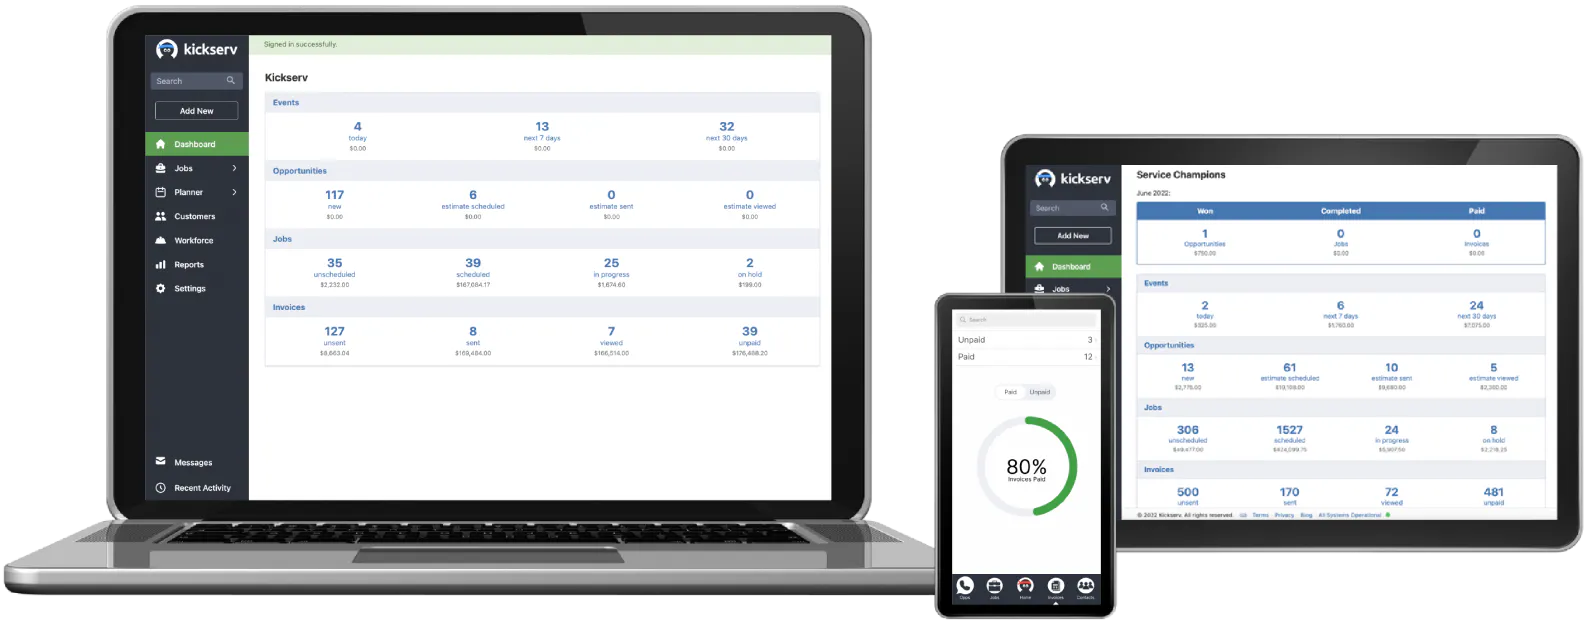 An image showing Kickserv software's dashboard on a laptop, mobile phone, and tablet.